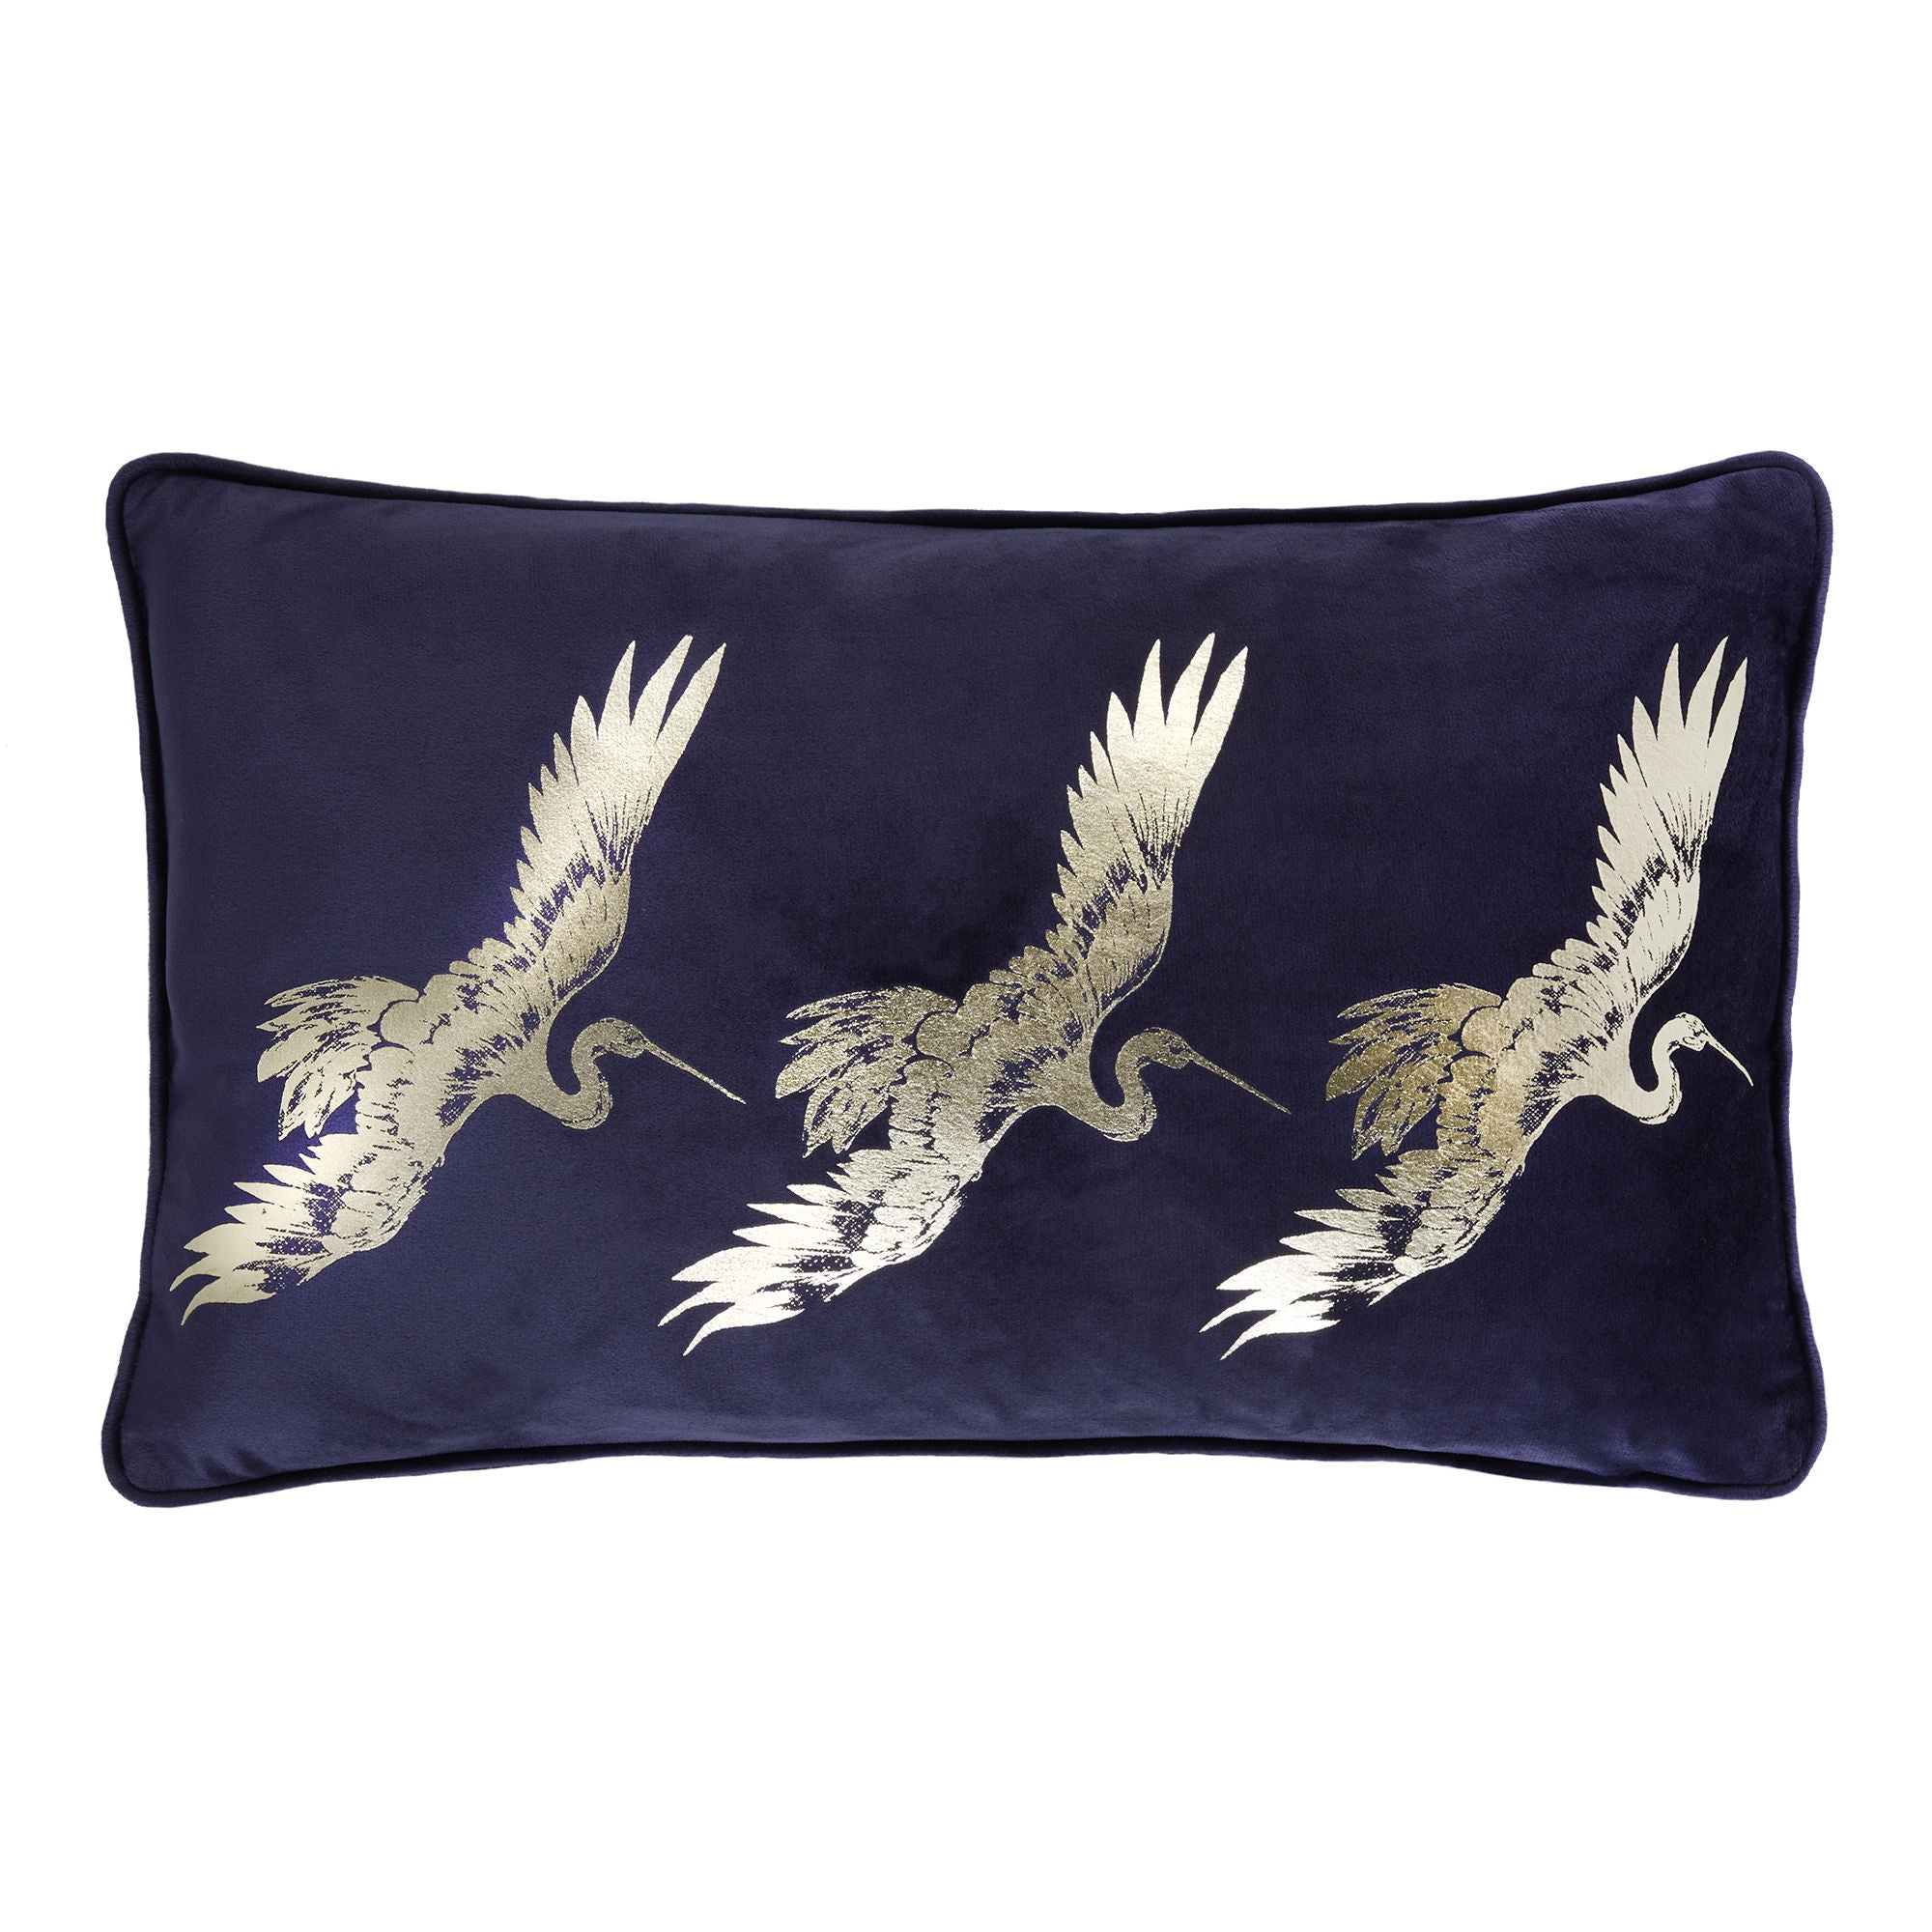 Qing Cushion by Laurence Llewelyn-Bowen in Navy 28 x 48cm - Cushion - Laurence Llewelyn-Bowen